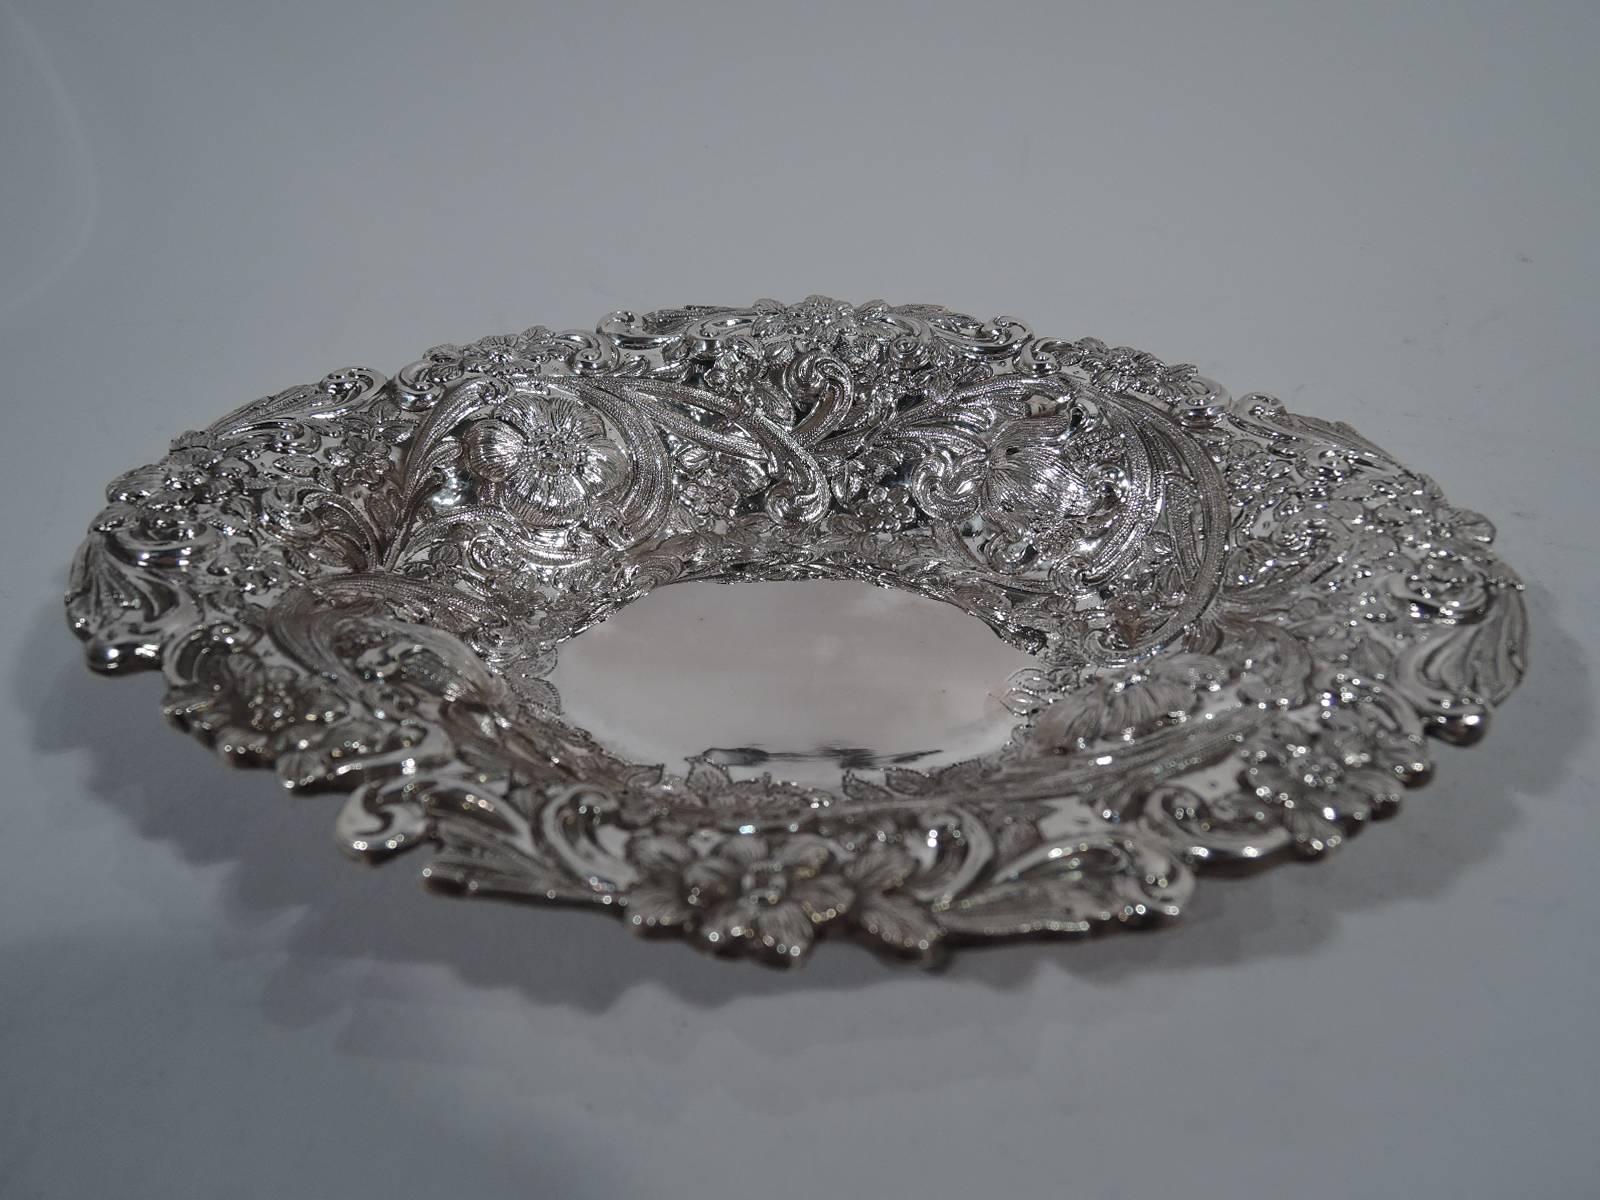 Victorian sterling silver bowl. Made by William Gibson & John Langman in London in 1888. Plain and ovalish well, tapering sides, and irregular rim. Dense repousse ornament heightened with engraving: Traditional floral ornament embedded with big bold